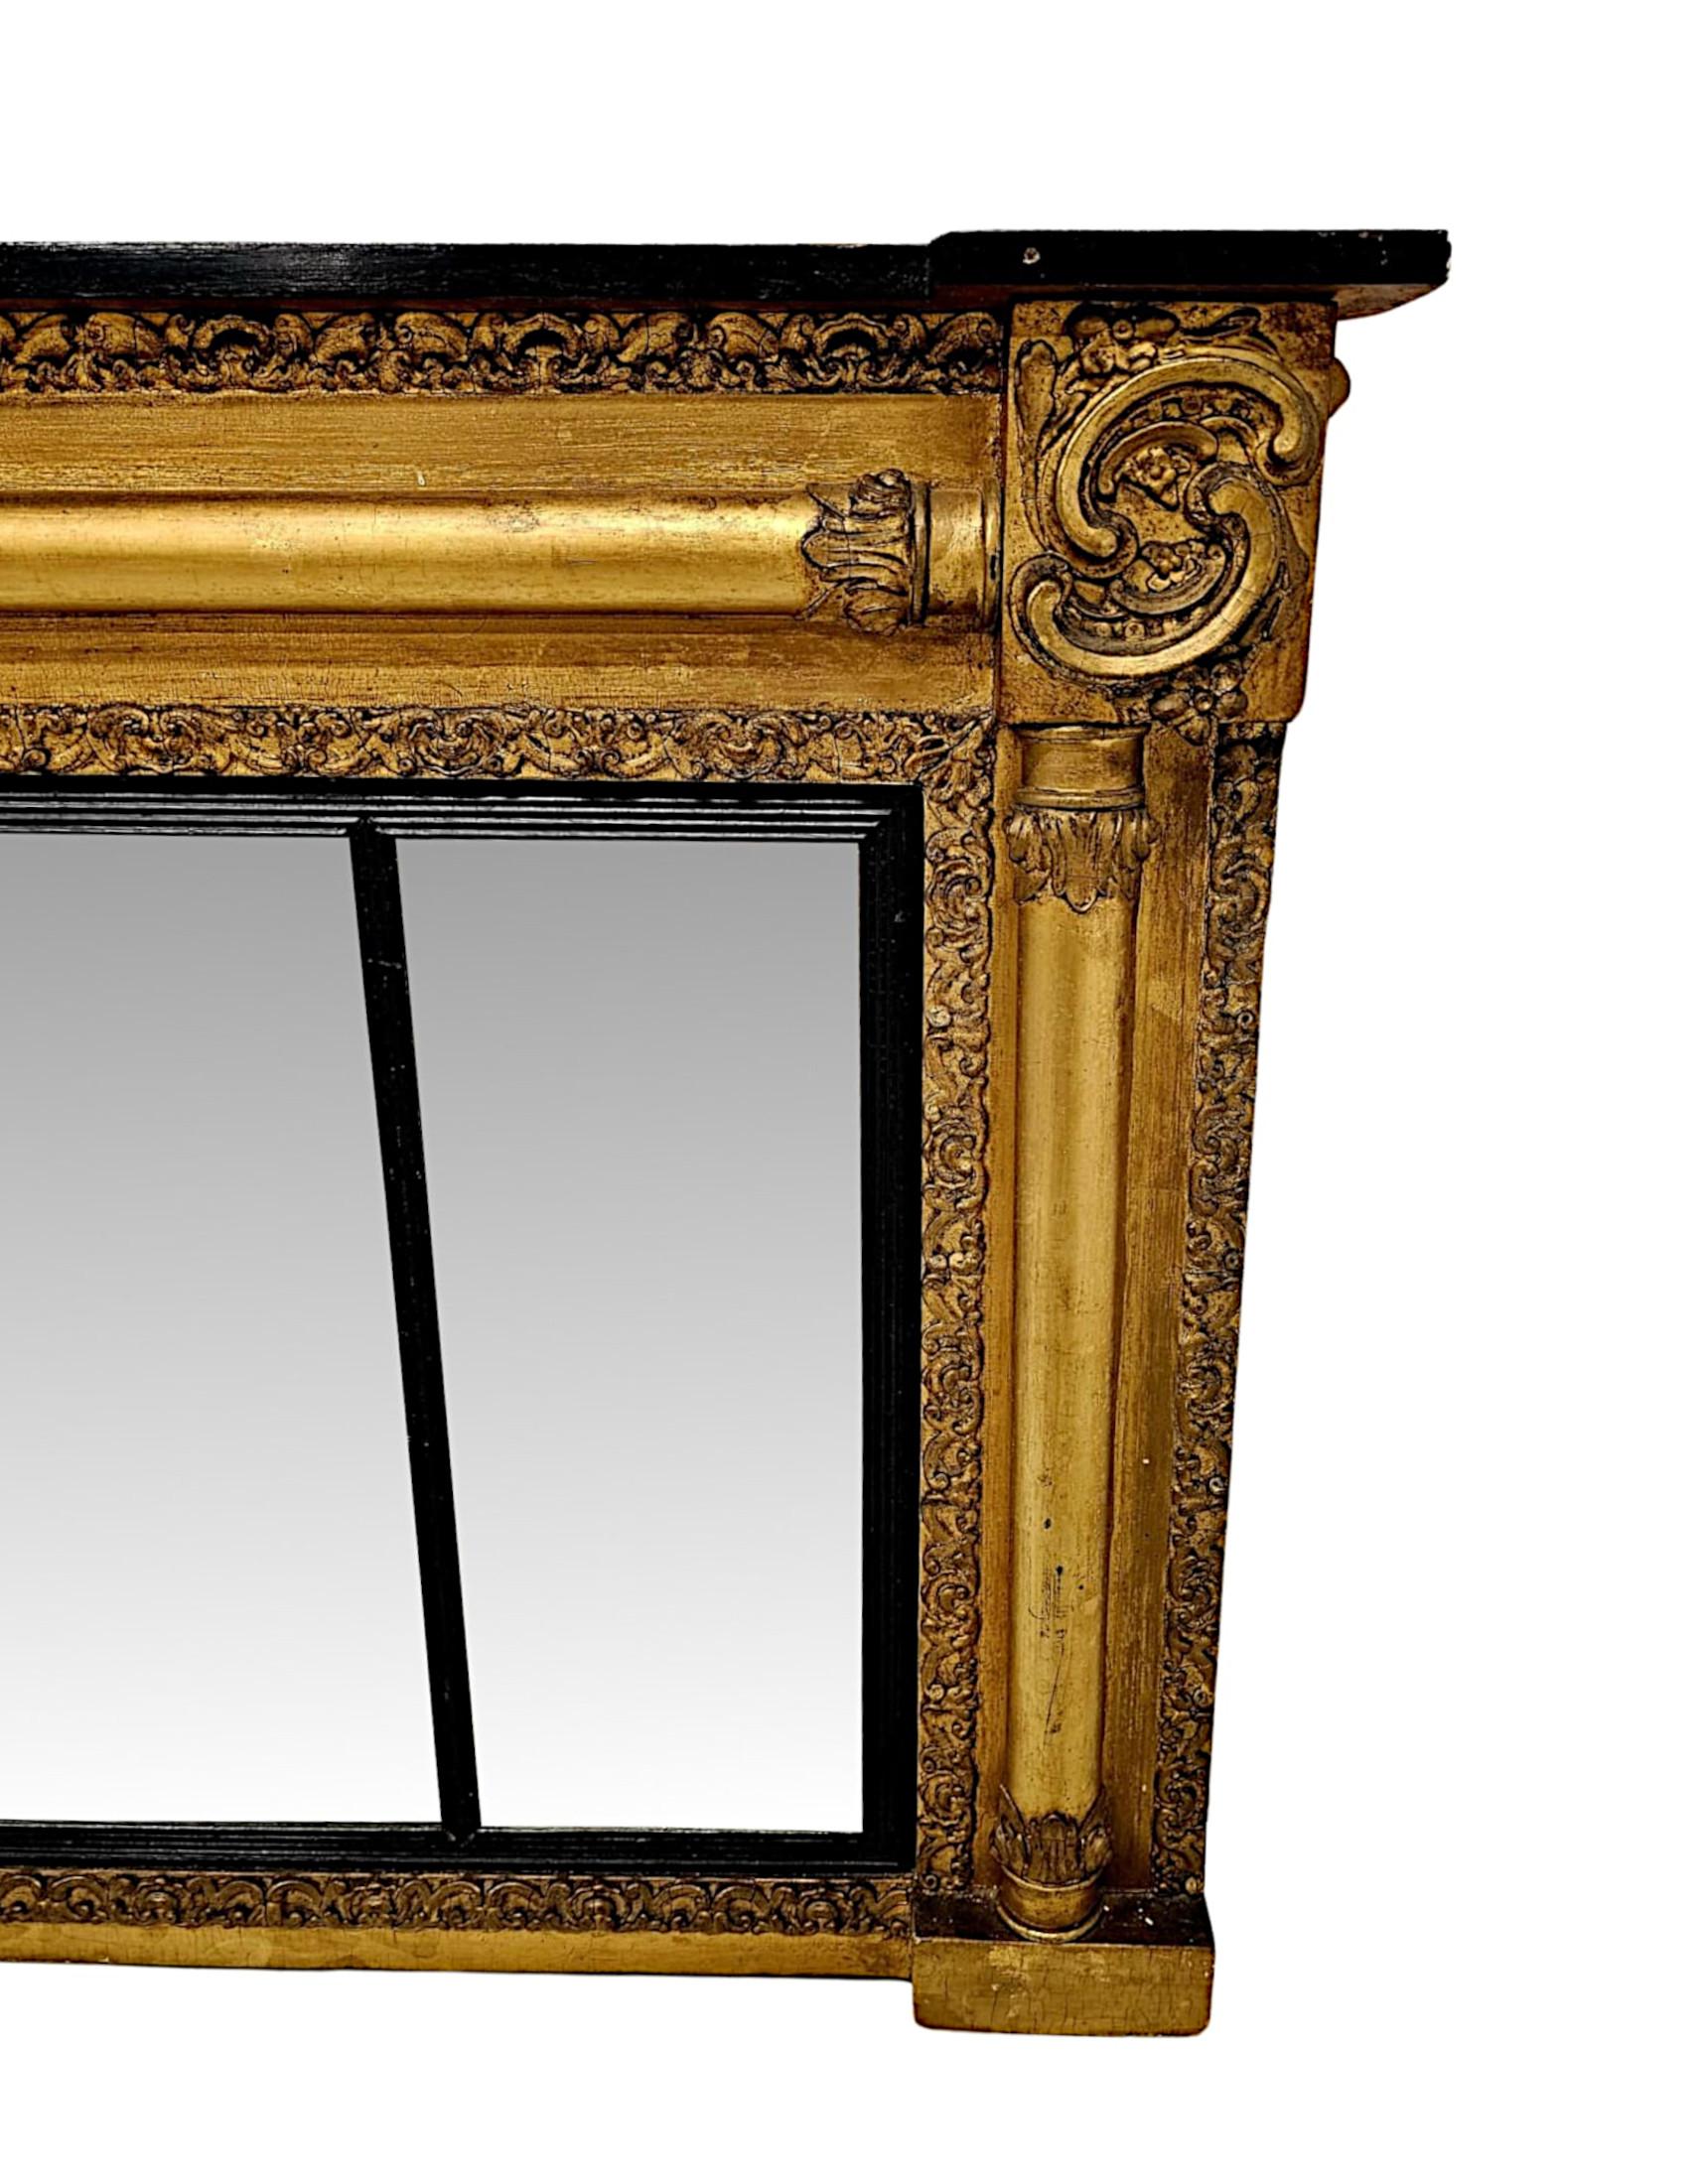 A stunning and unusual  19th Century giltwood tryptch overmantel mirror, finely hand carved of exceptional quality and low and wide proportions.  The moulded and fluted giltwood frame with intricately detailed foliate motif detail throughout is